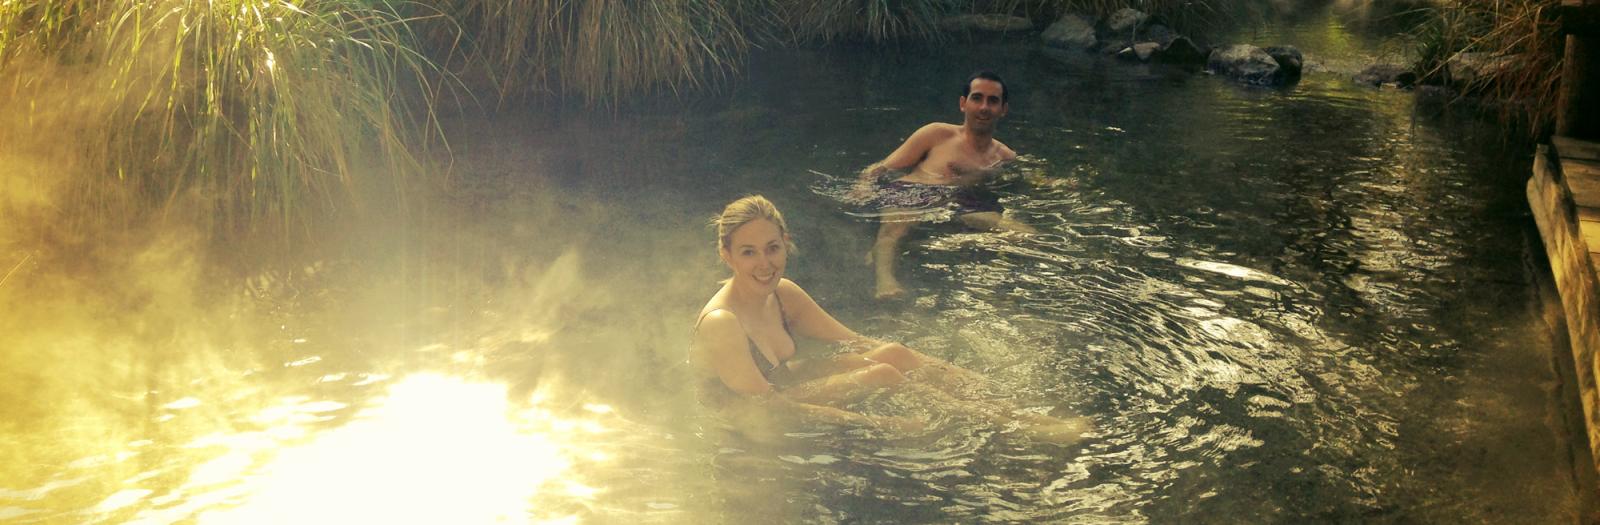 Couple soaking in New Zealand's Natural Hotpools.